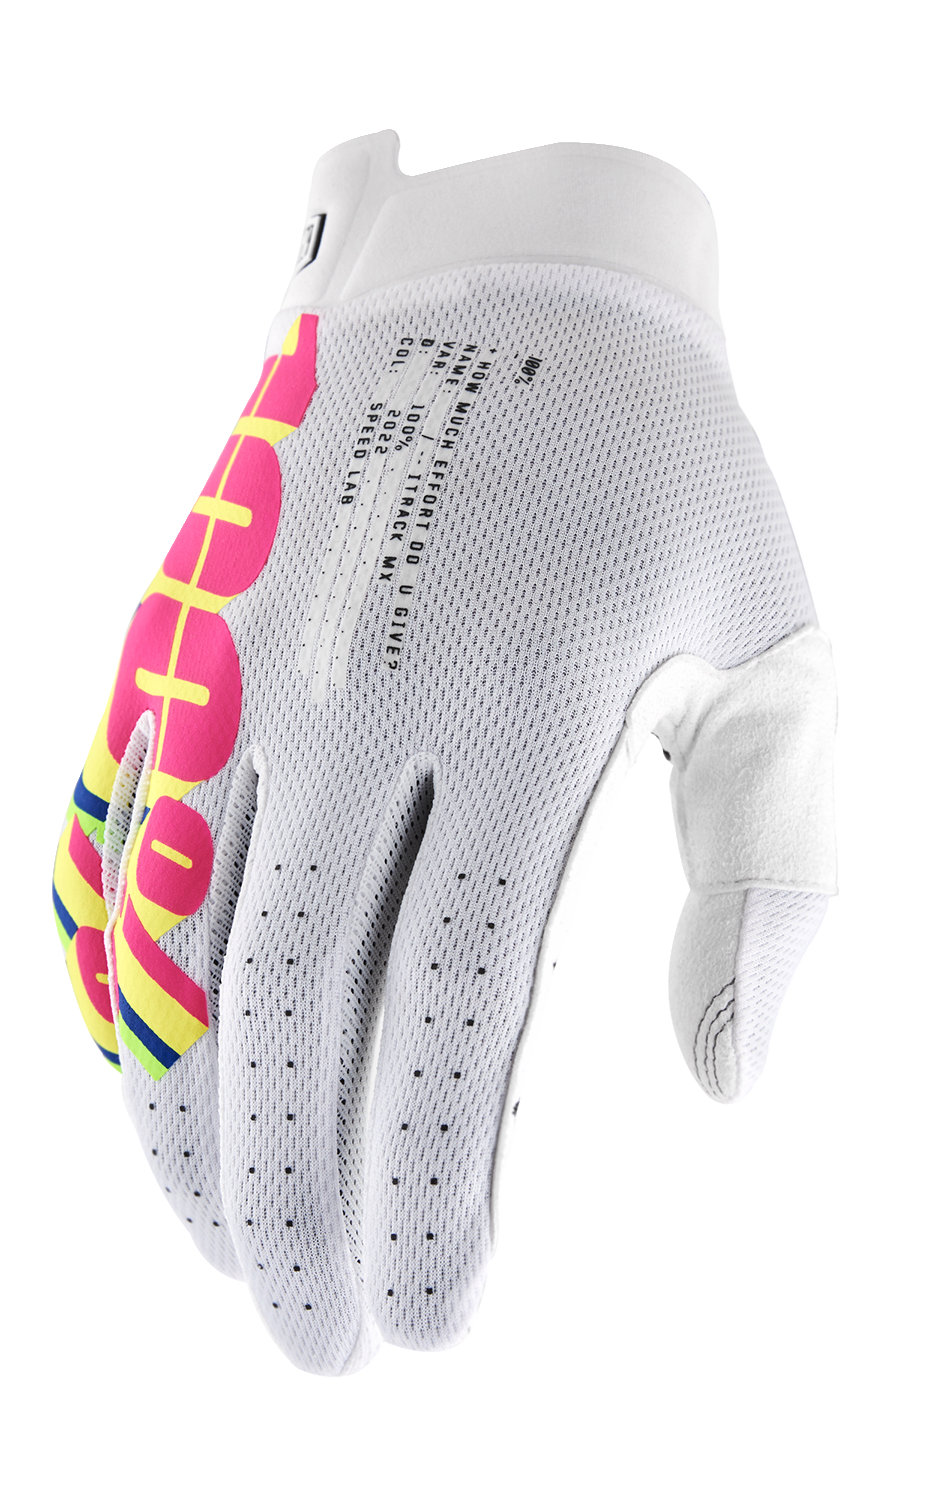 100% iTrack Gloves - System White - Small 10008-00040